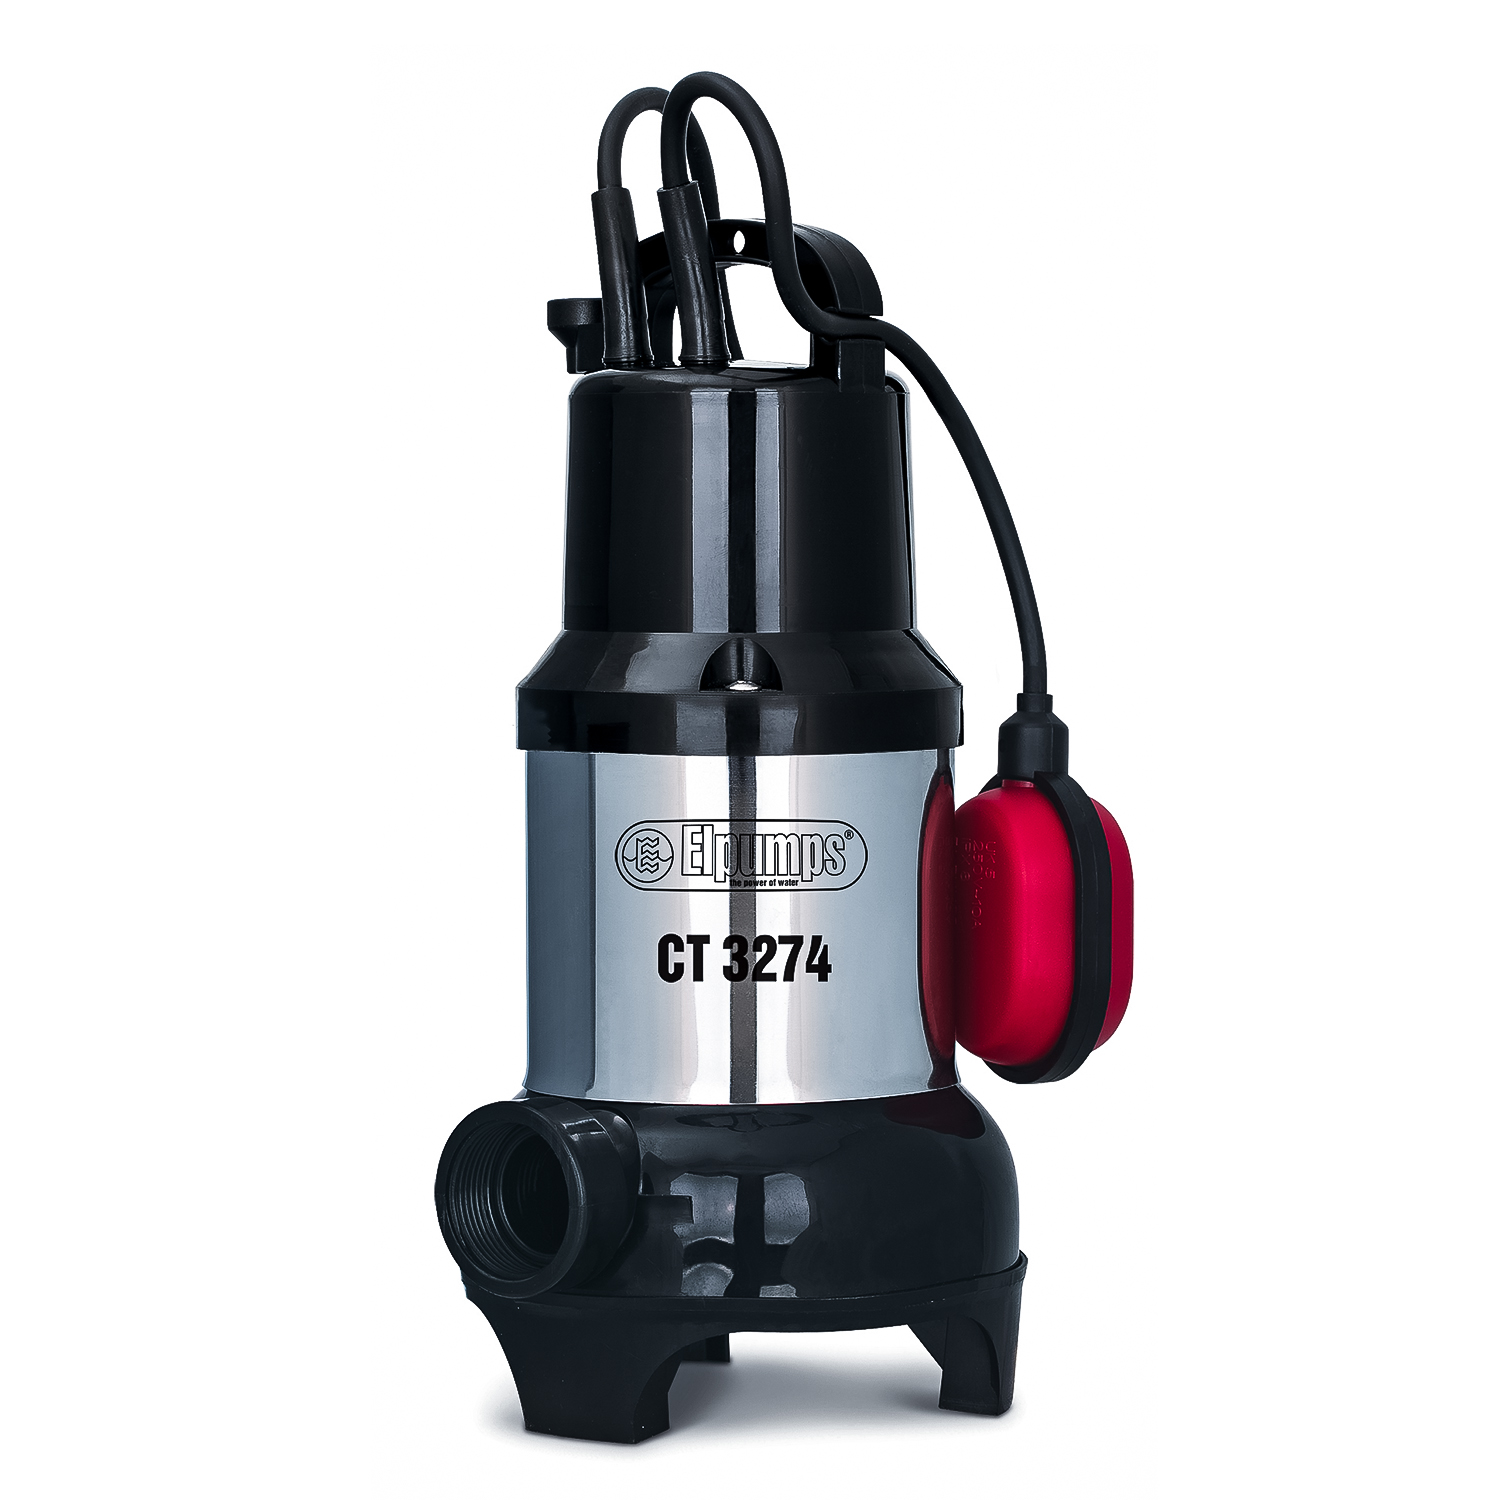 CT 3274 S Submersible pumps for sewage